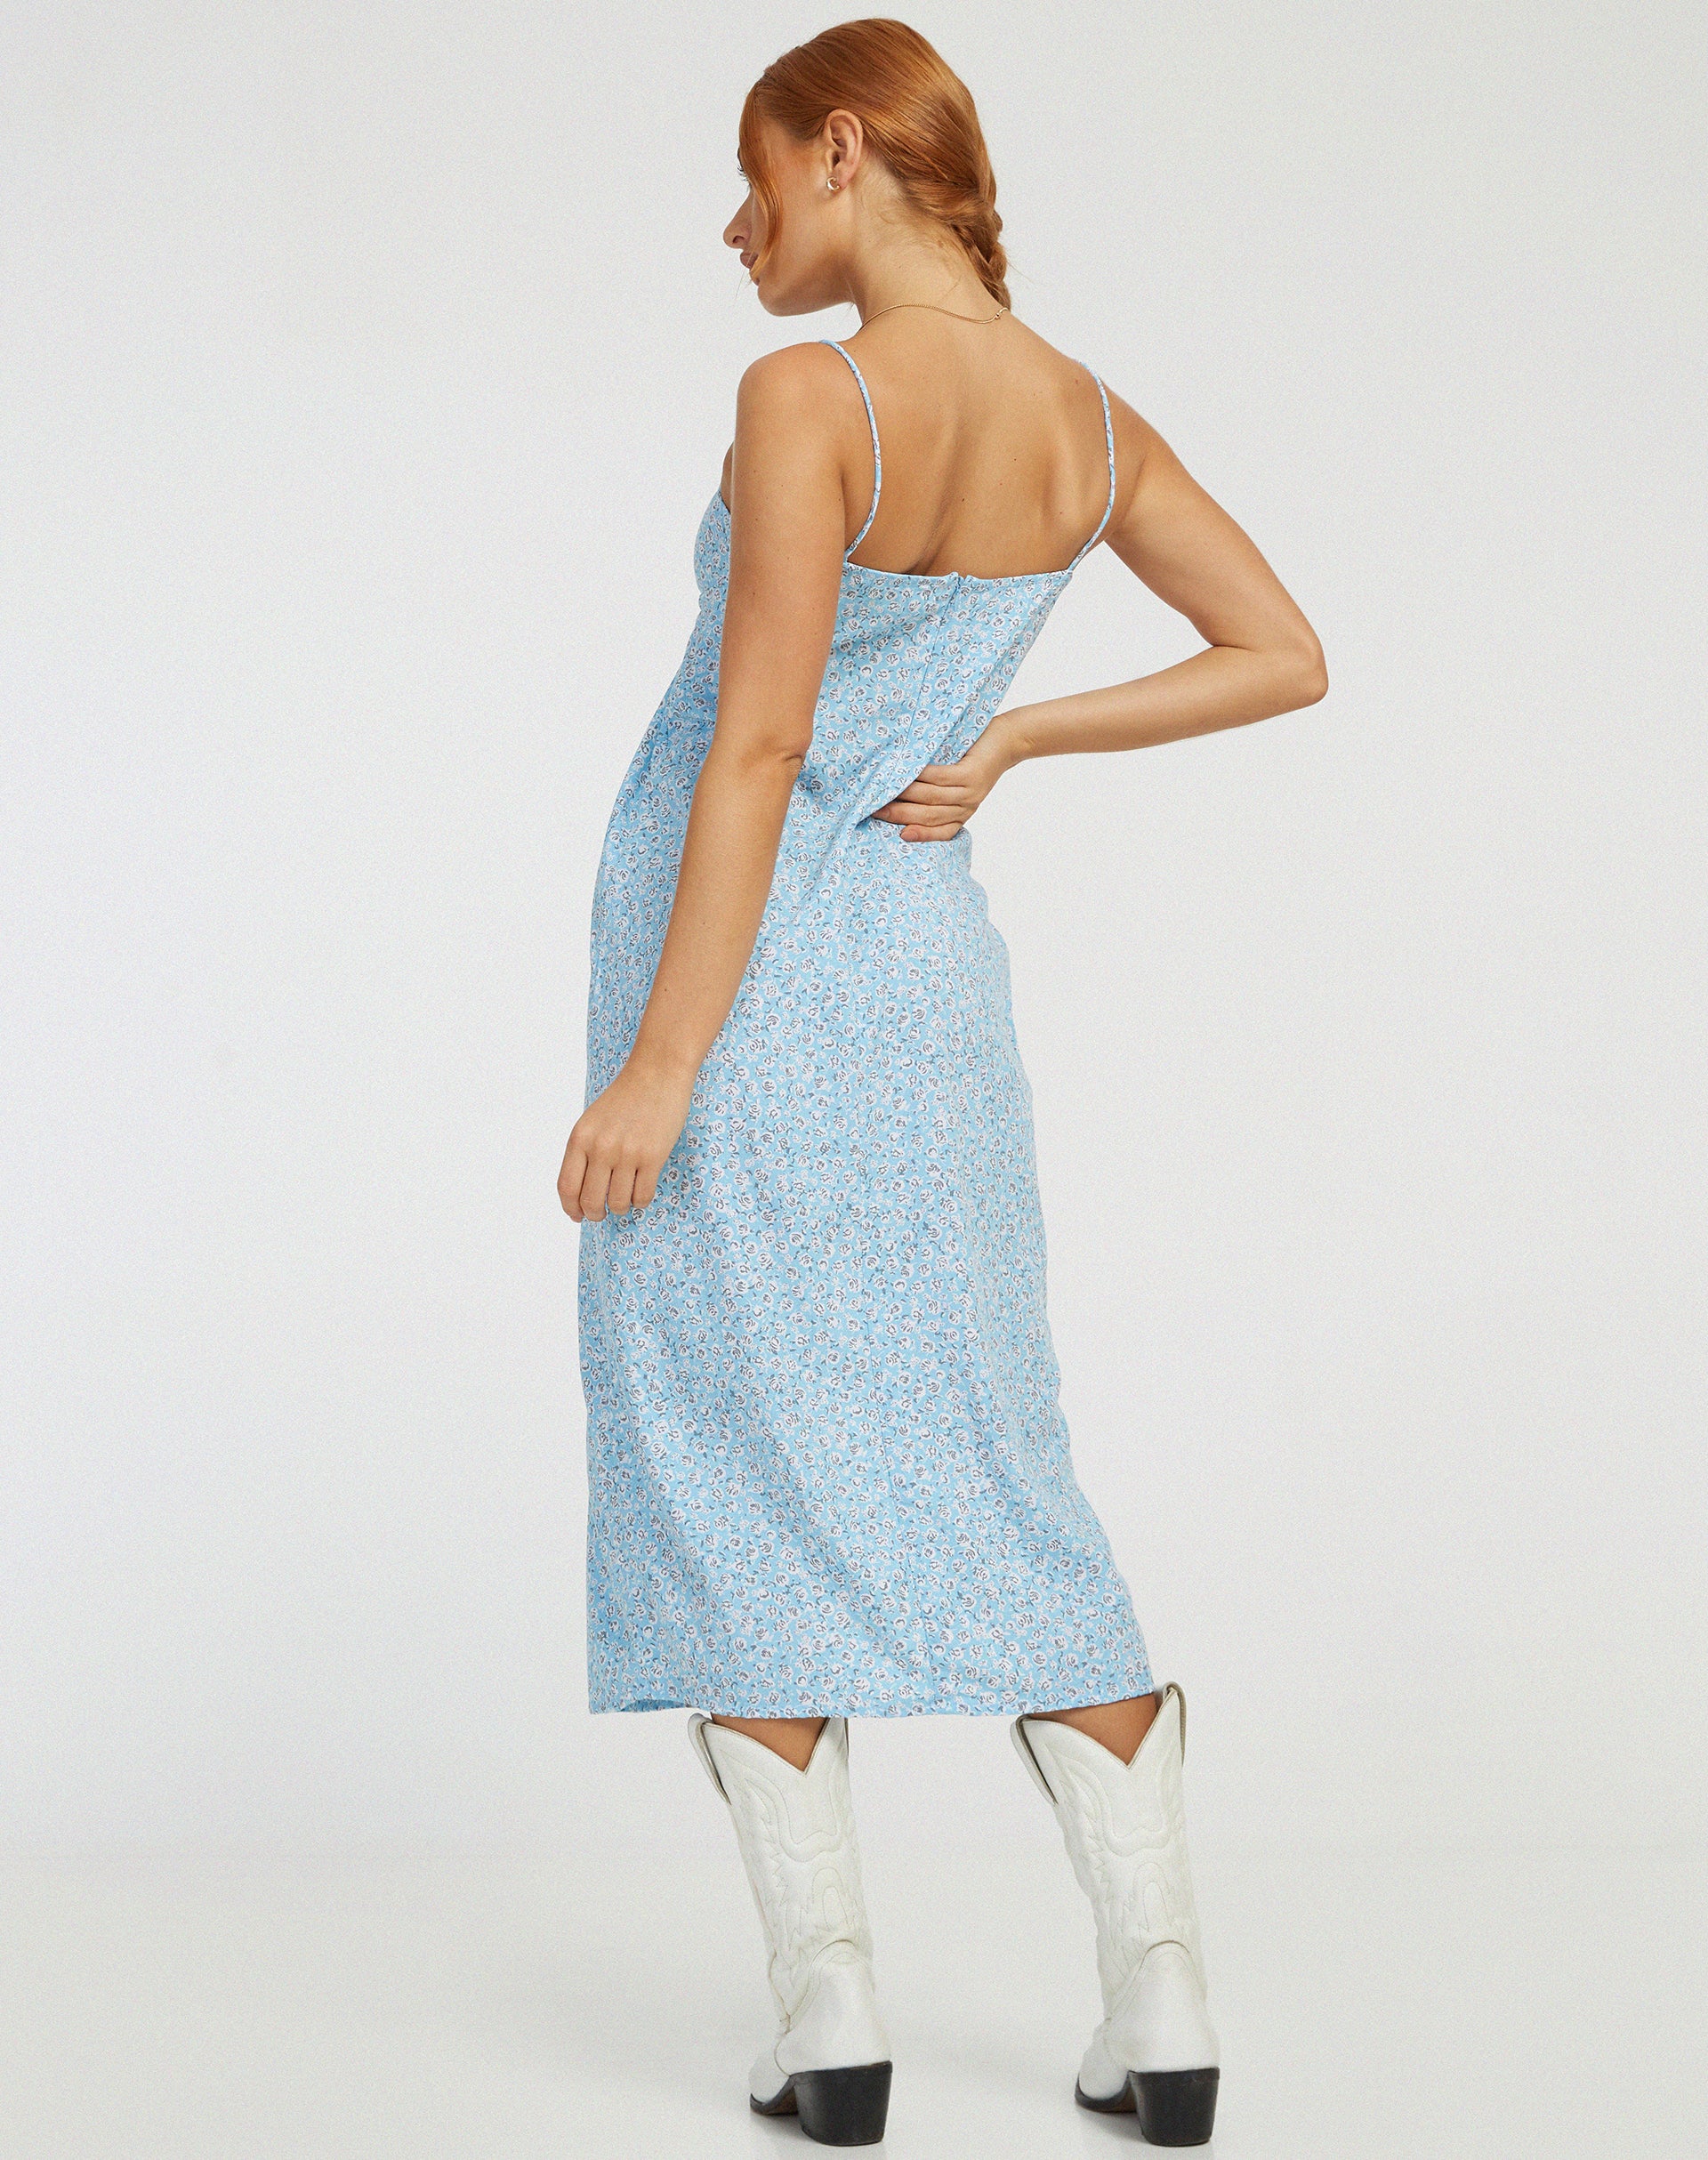 Image of Cypress Midi Dress in Ditsy Rose Blue